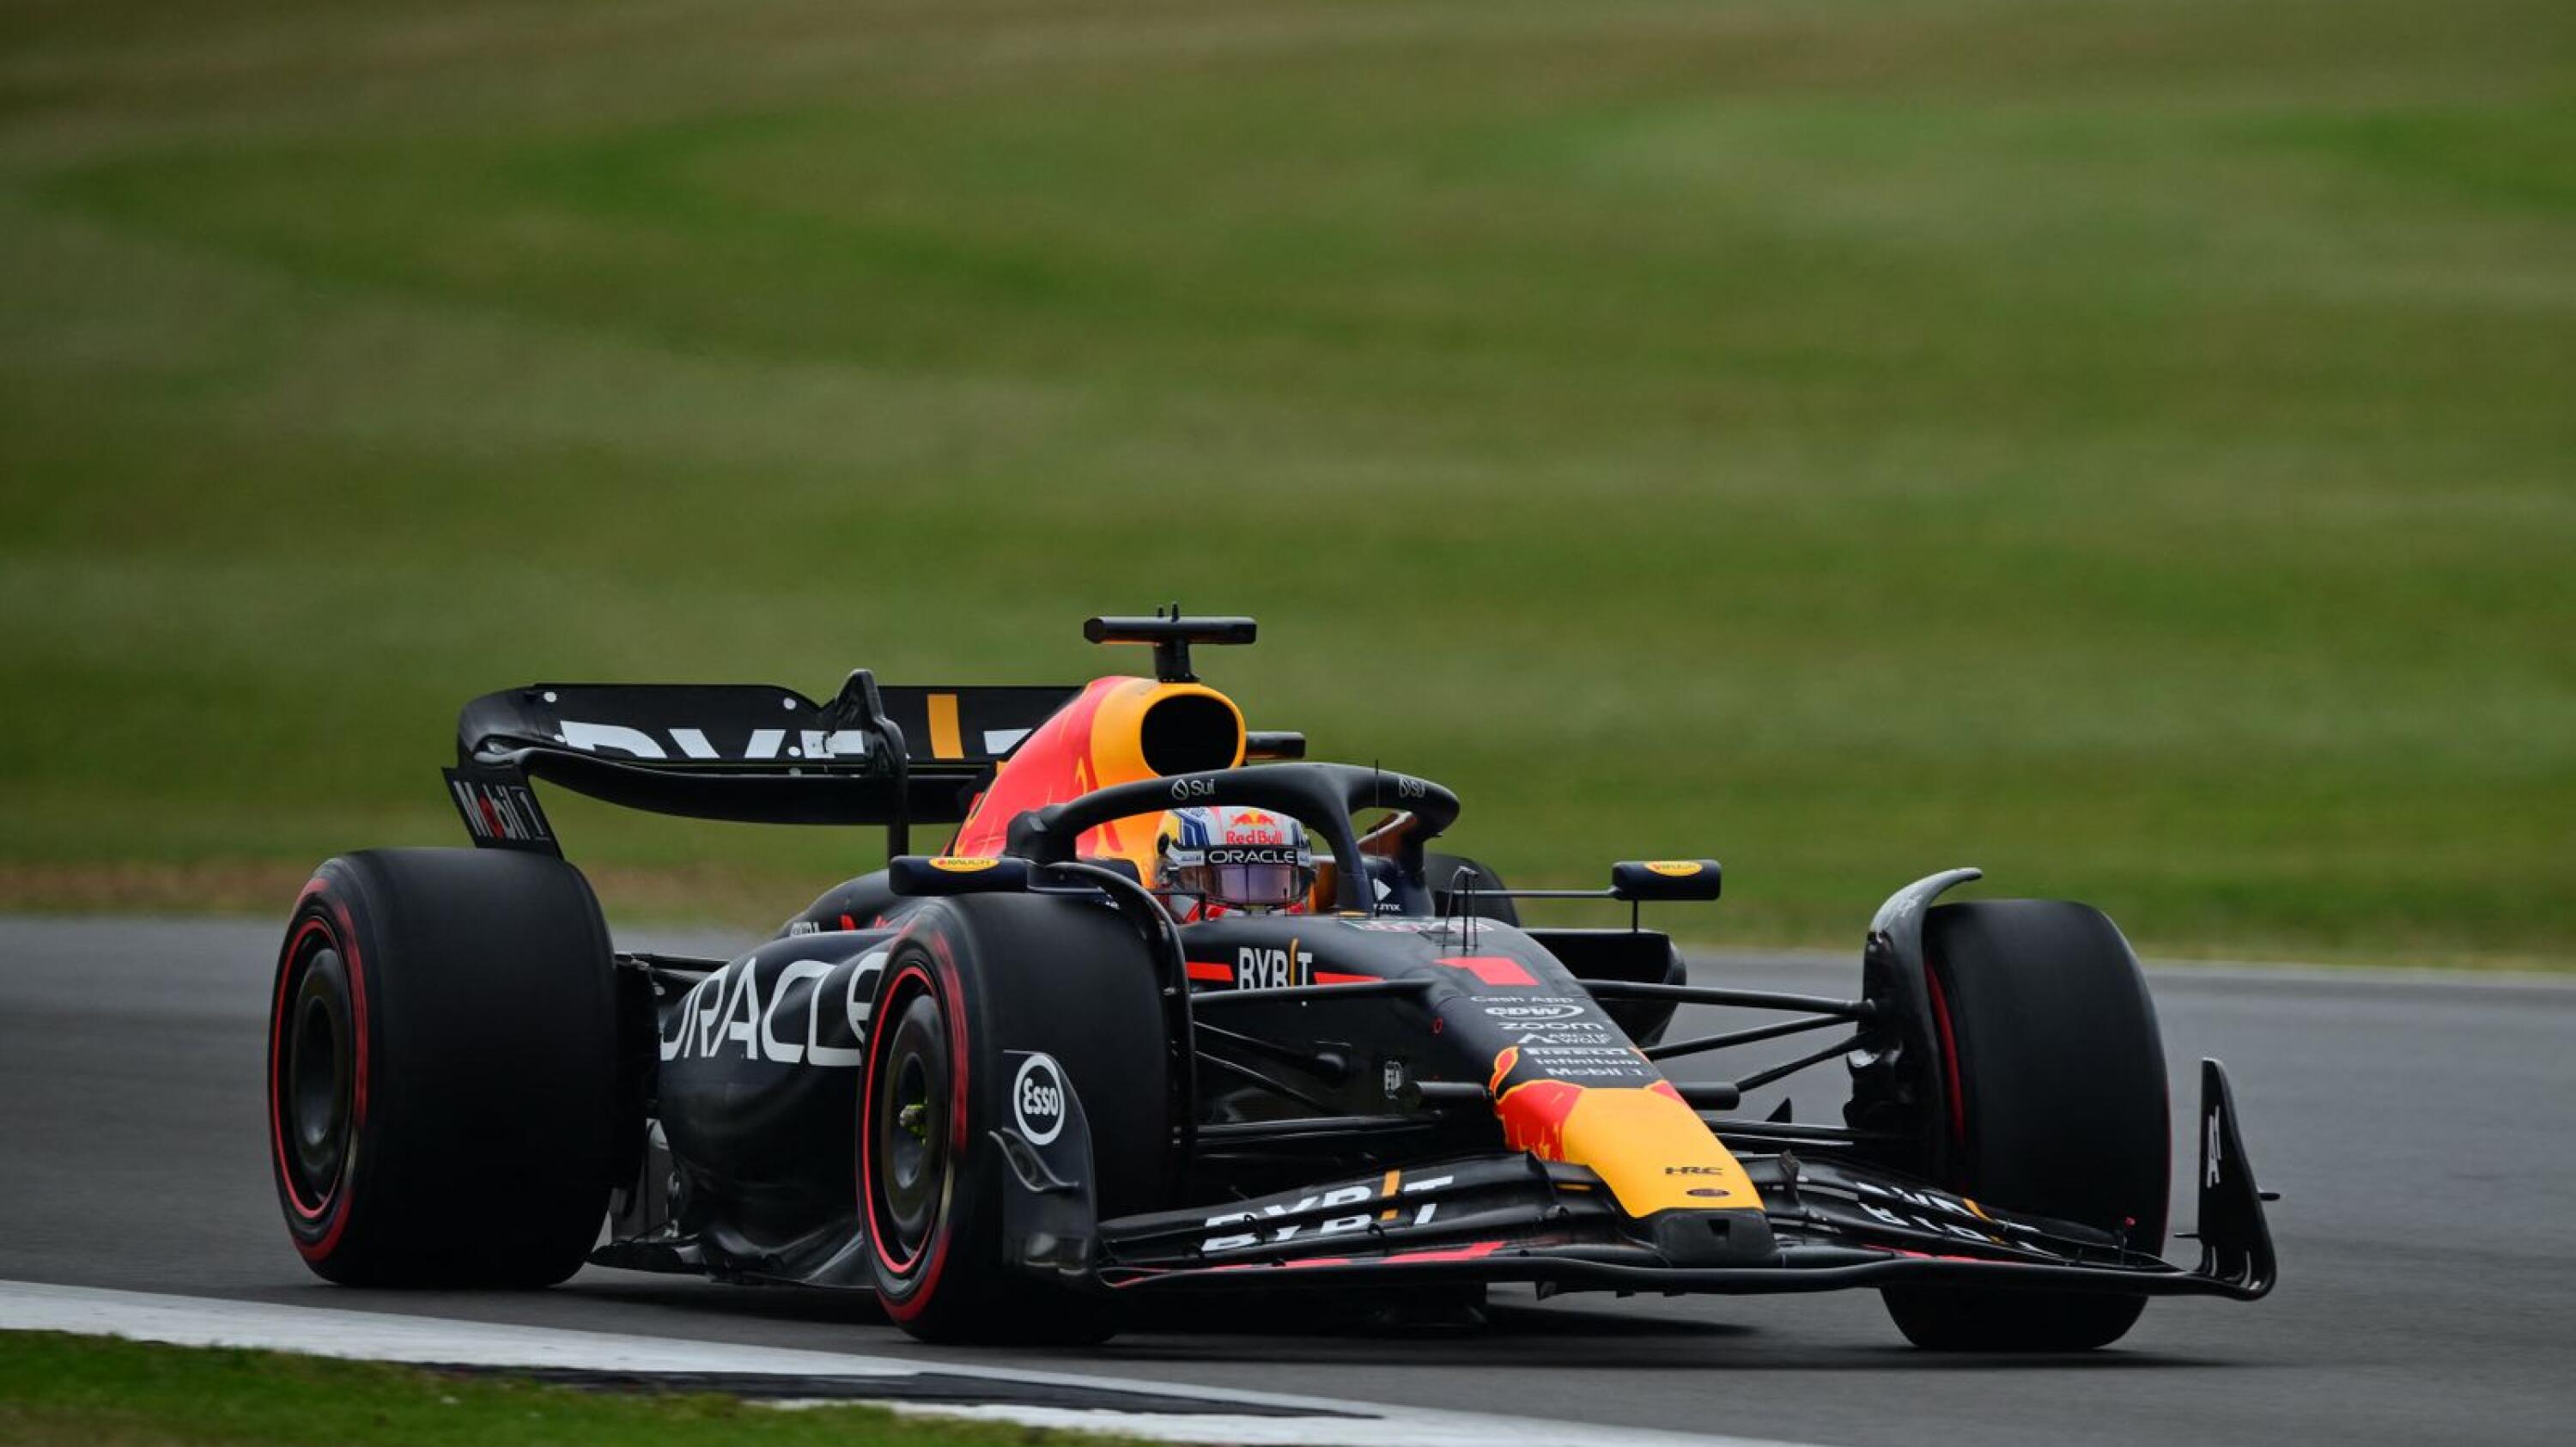 Red Bull Racing's Max Verstappen drives during the qualifying session for the Formula One British Grand Prix at the Silverstone motor racing circuit in Silverstone